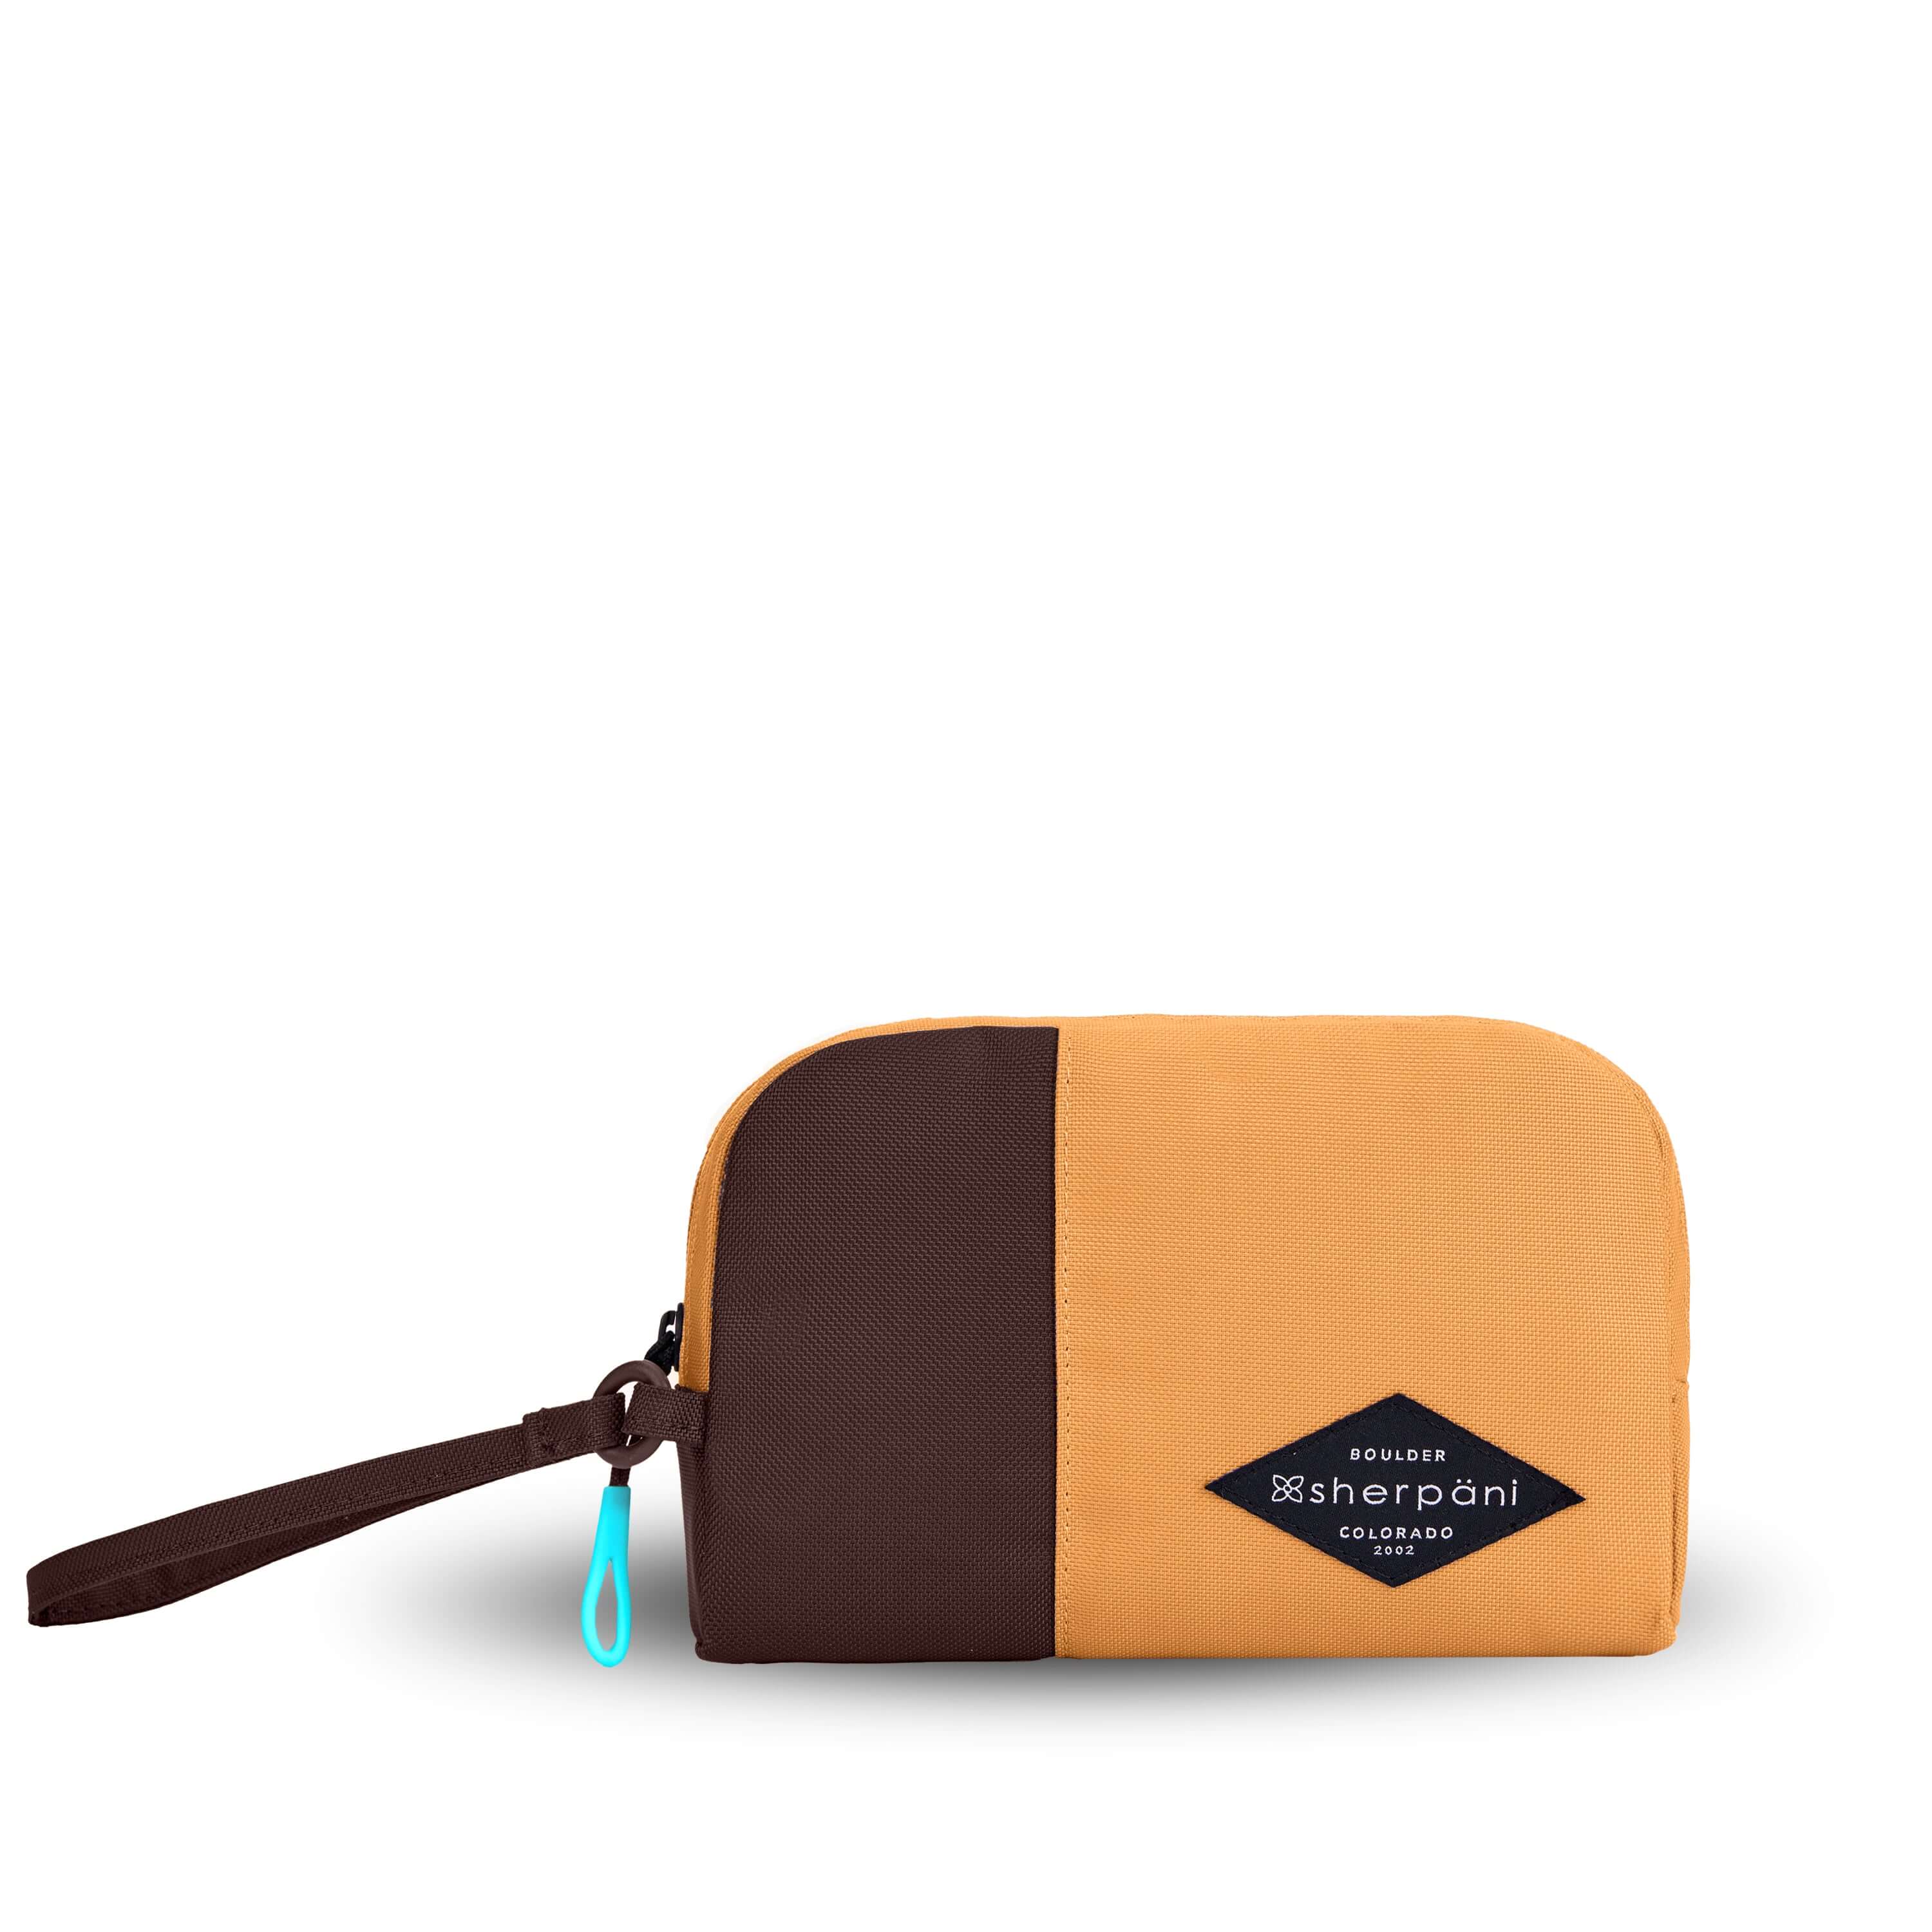 Flat front view of Sherpani travel accessory, the Jolie in Sundial, in medium size. The pouch is two-toned in burnt yellow and brown. It features a brown wristlet strap and an easy-pull zipper accented in aqua. 